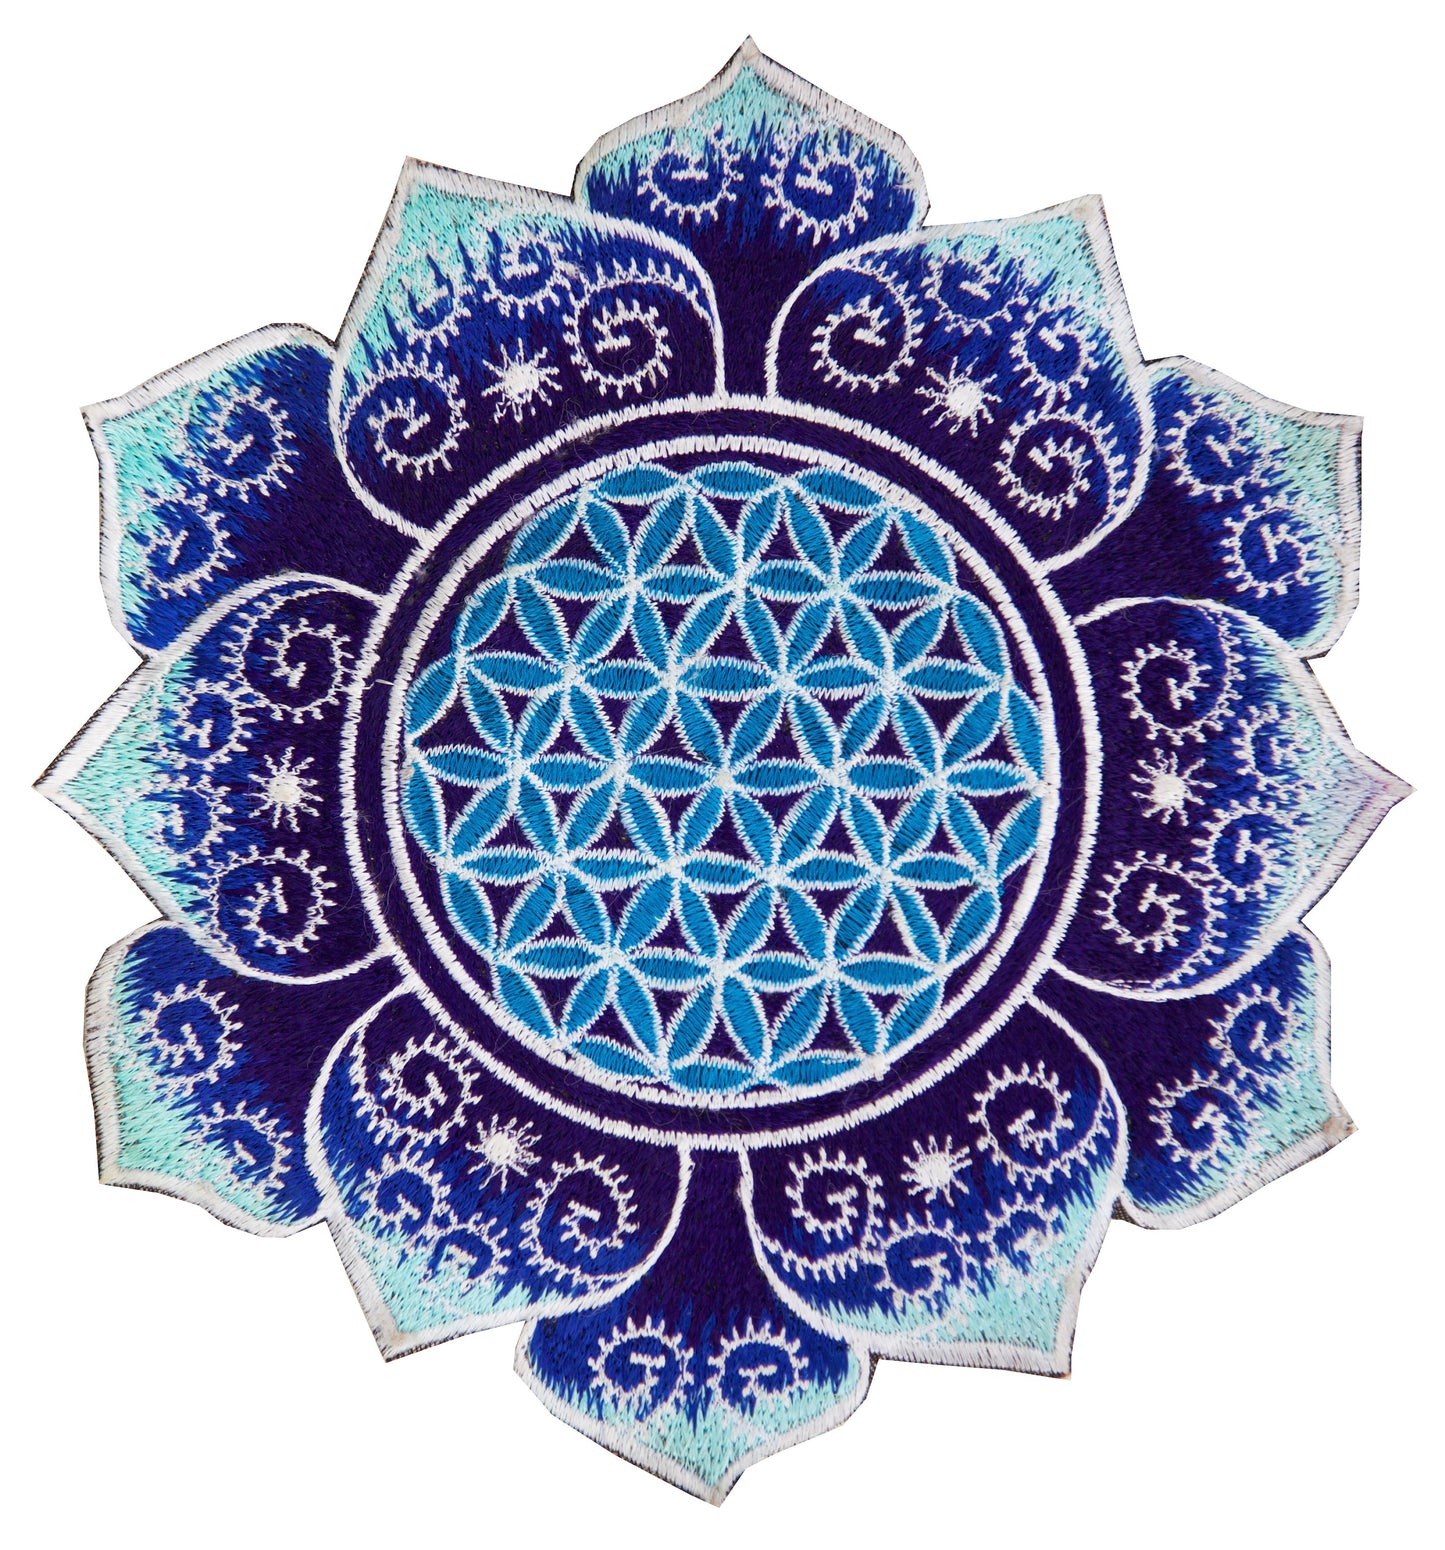 White snow fractal Flower of Life embroidery for sew on - holy geometry sacred healing energy patch